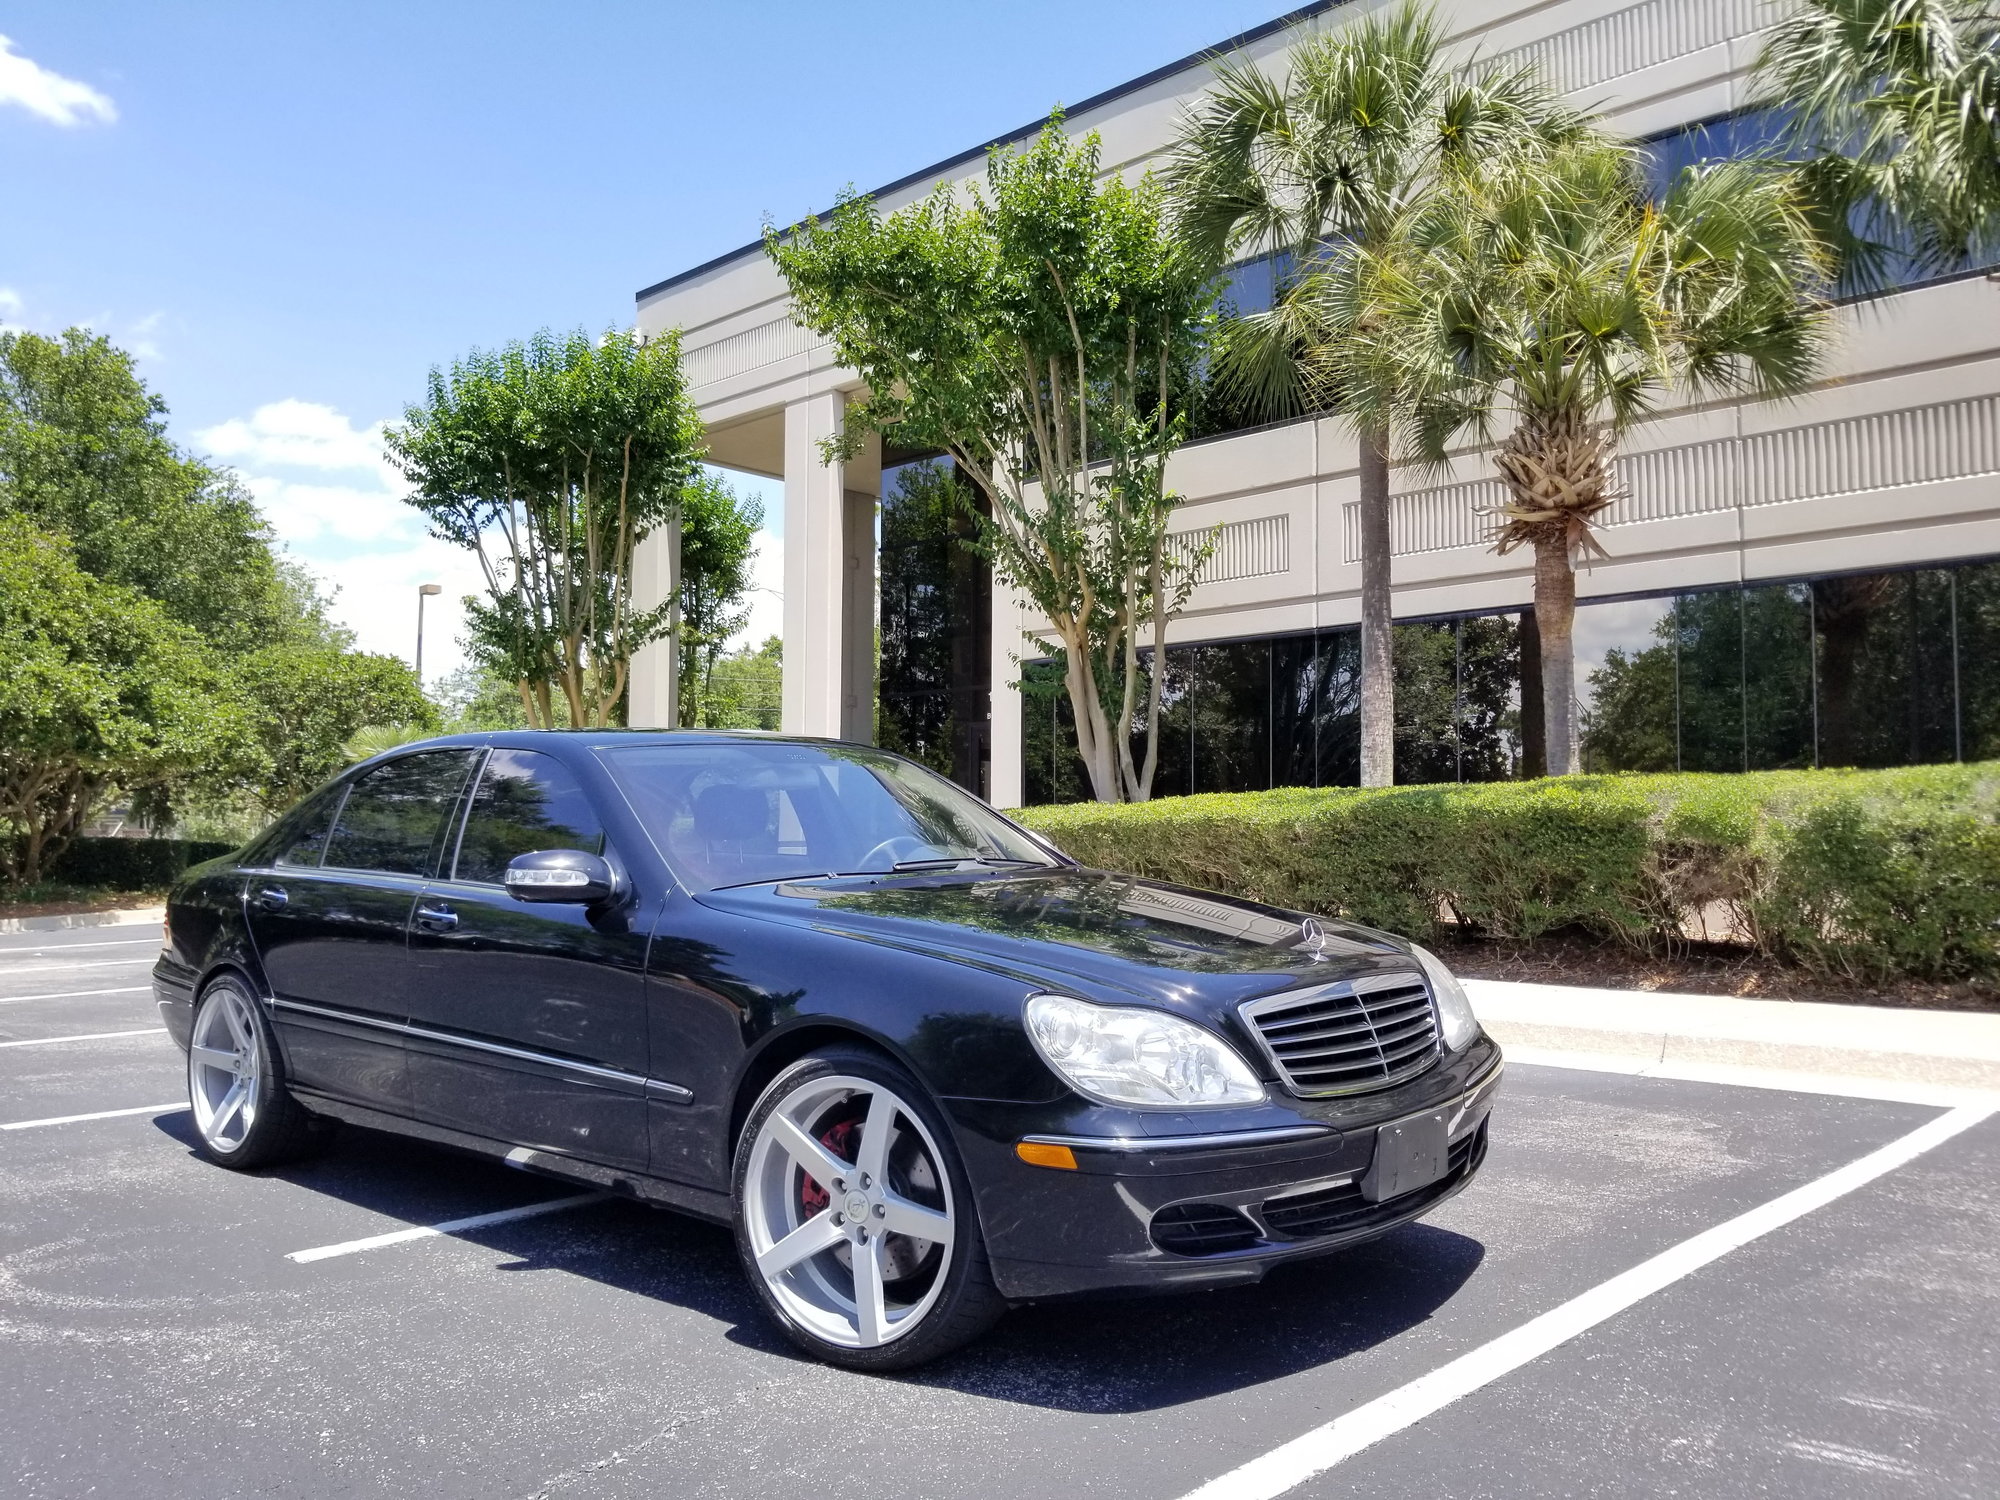 2005 Mercedes-Benz SL500 - 2005 Mercedes S500 4Matic ....Amazing Condition - Used - VIN WDBNG84J25A456245 - Jacksonville, FL 32258, United States